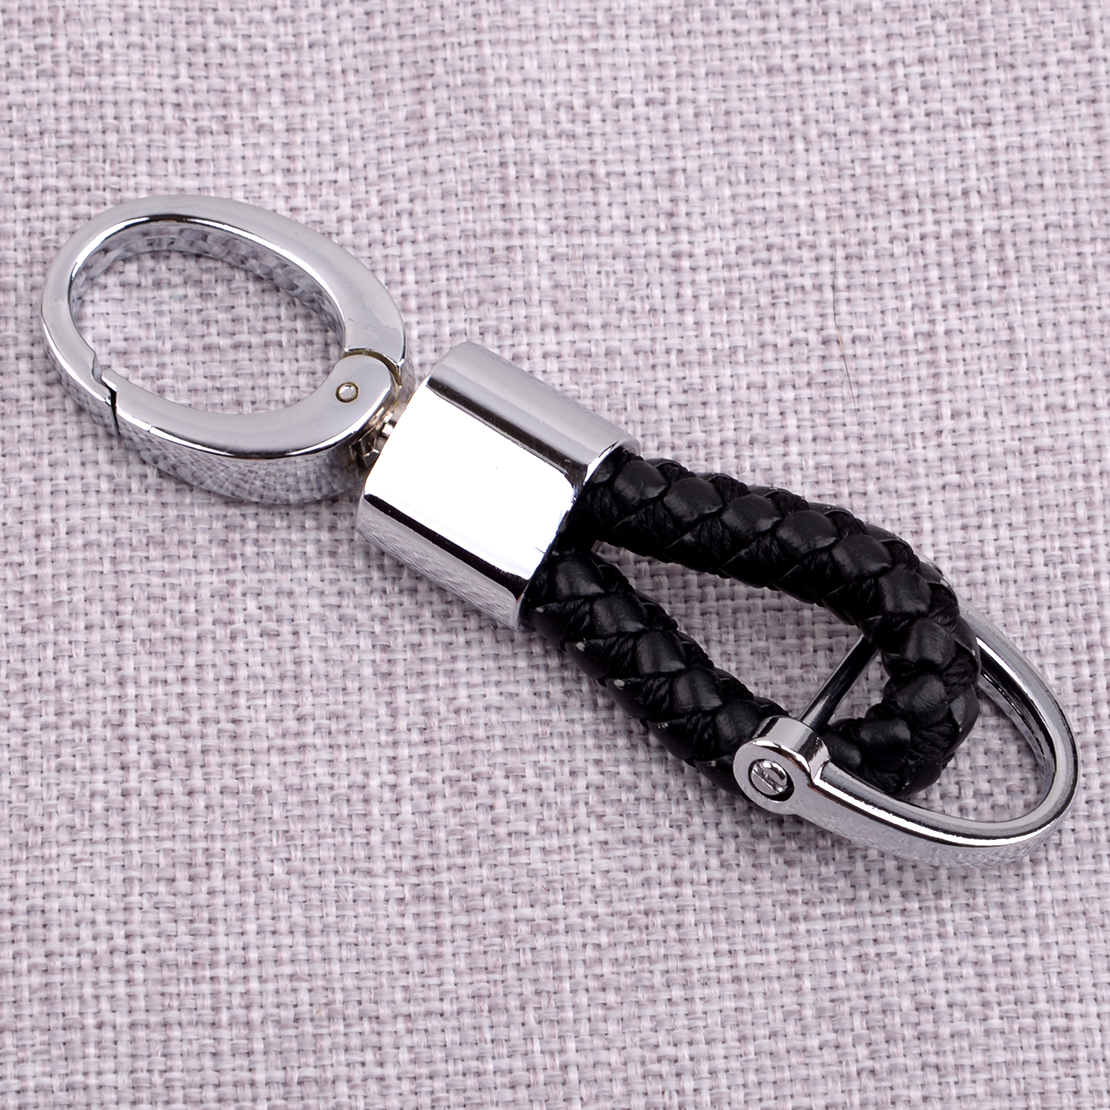 1x Vehicle Car Keychain Key Chain Key Ring Key Fob Leather Rope Strap Weave New 